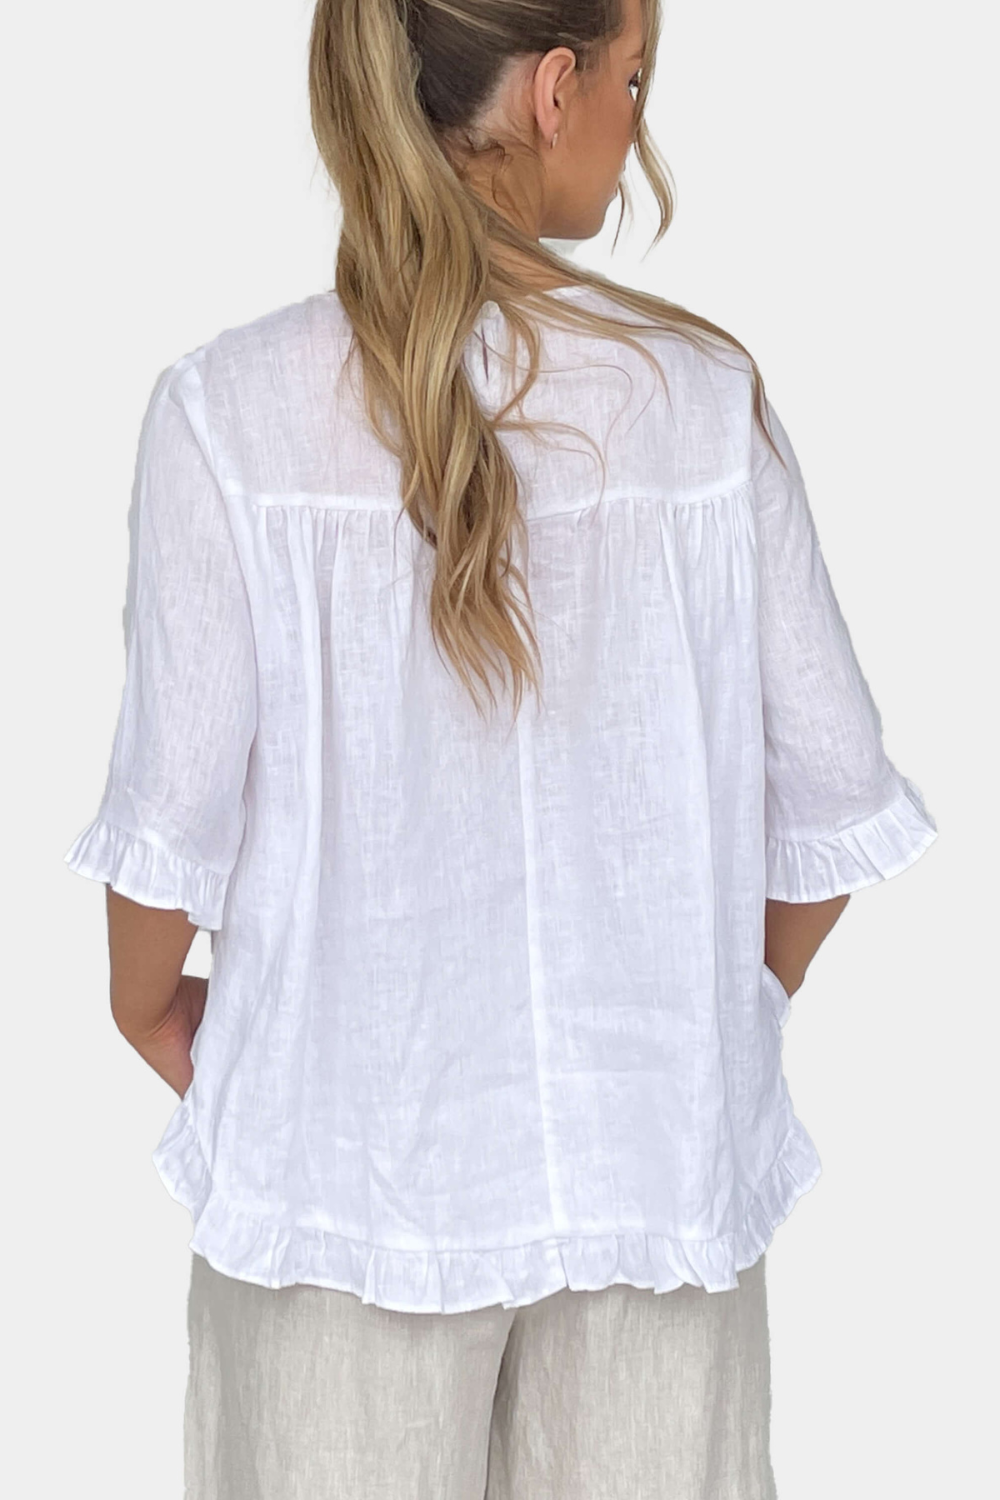 AMYIC 100% Linen Middle Sleeve Frill Shirt - White